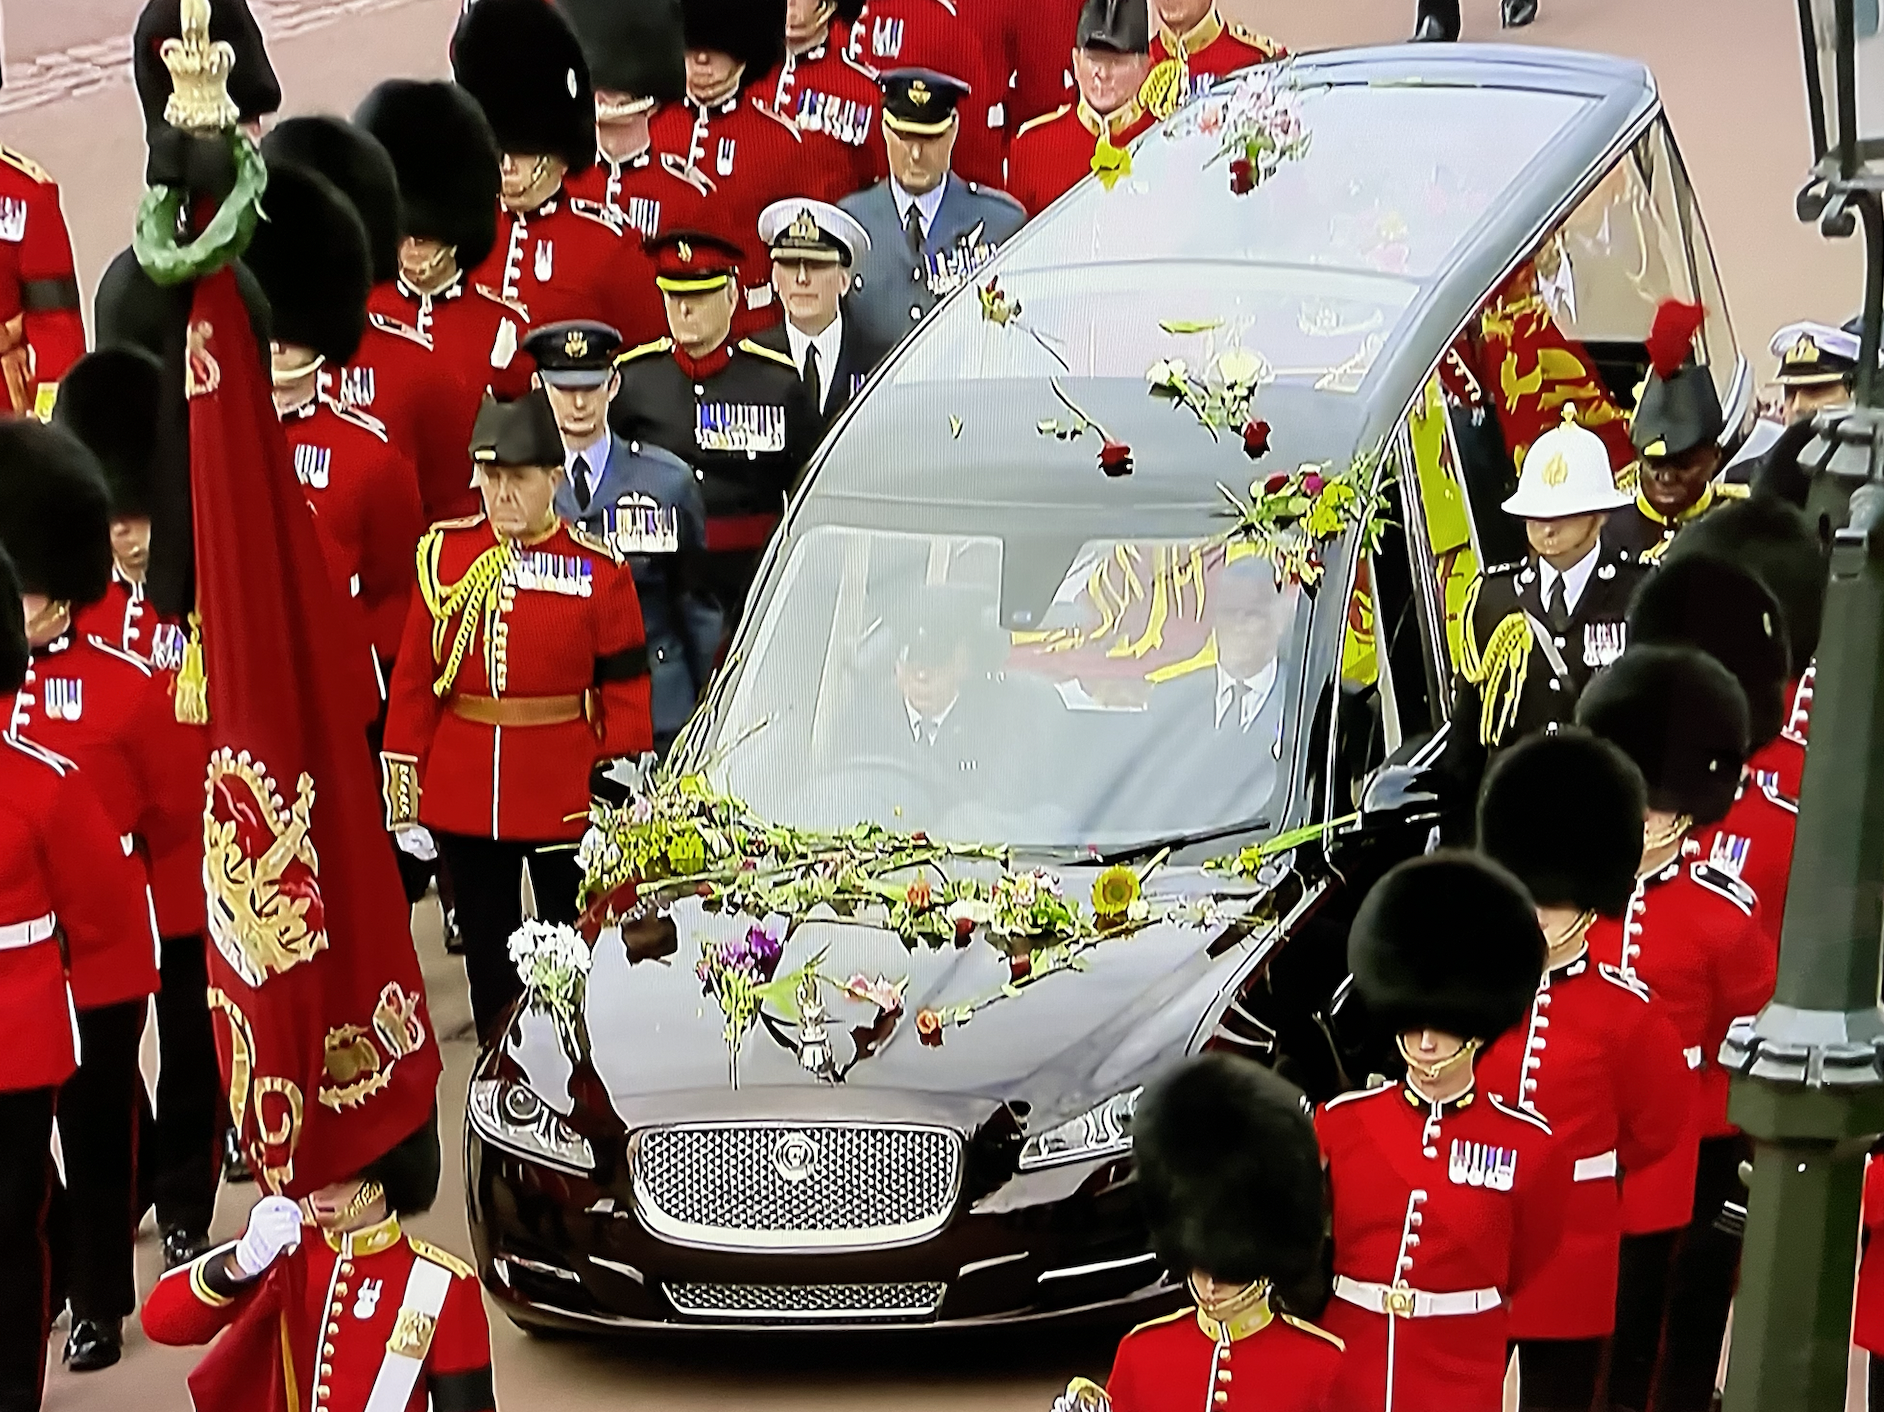 The Queen's coffin procession